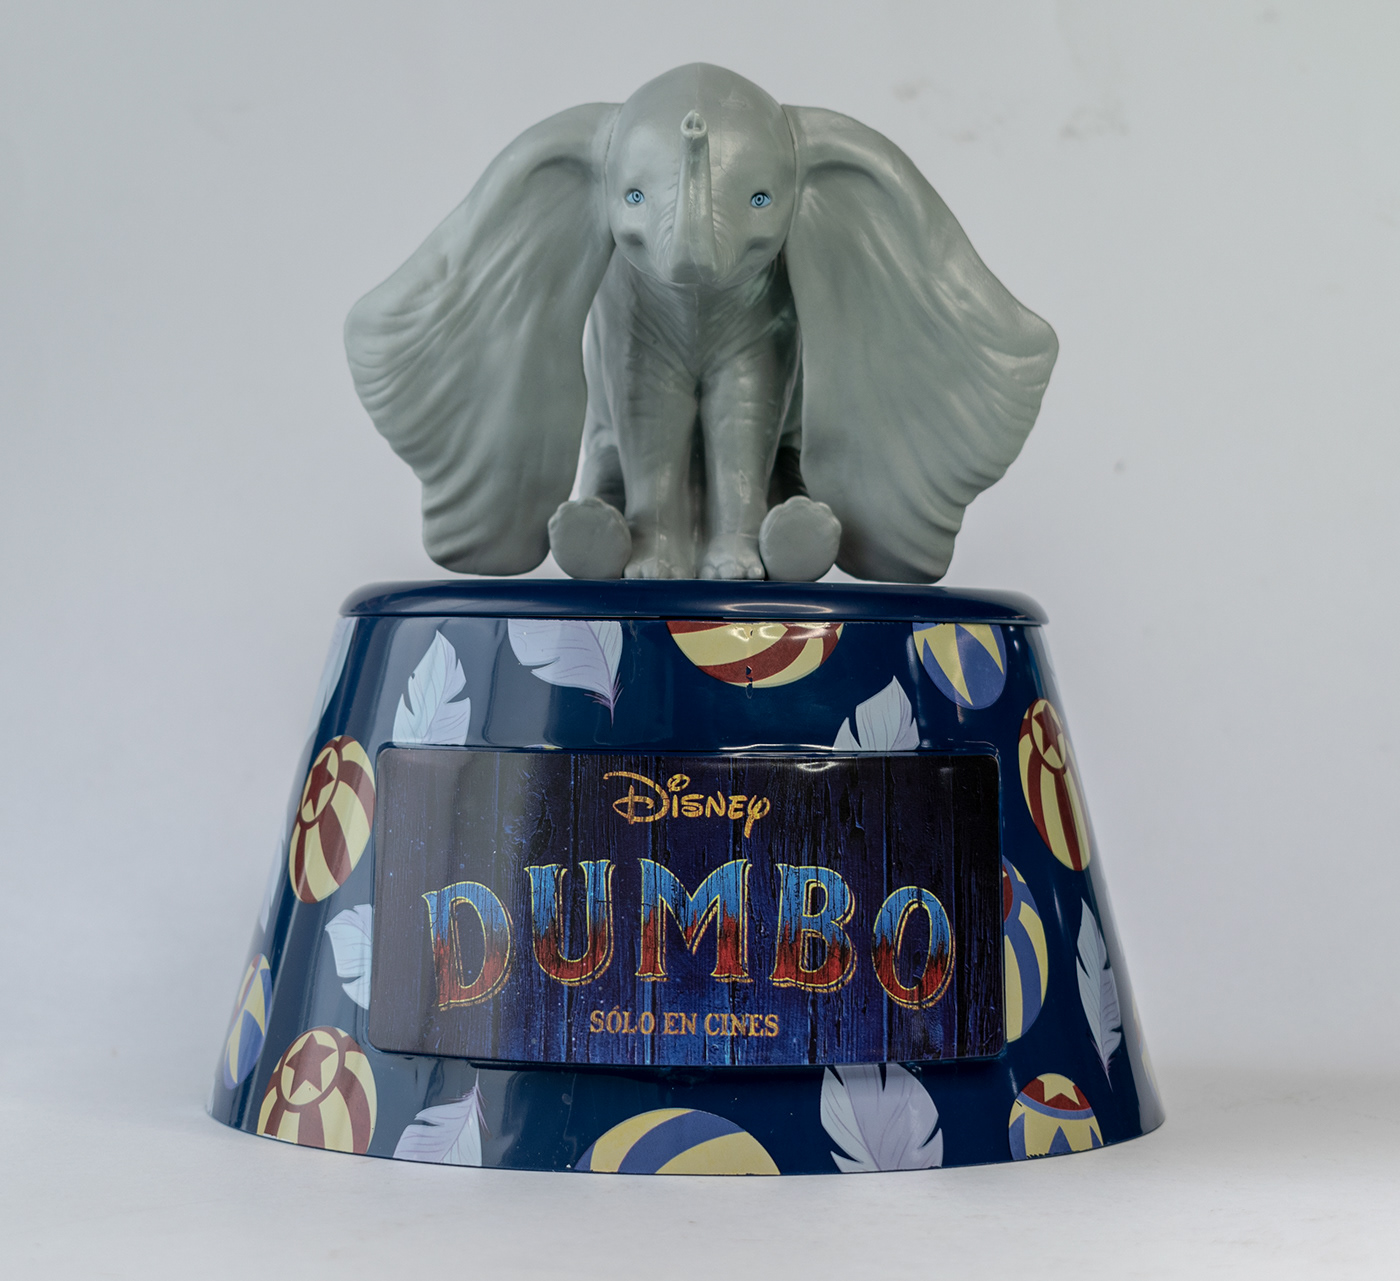 3D Rendering 3d animation 3d art product design  Dumbo movie collectibles disney